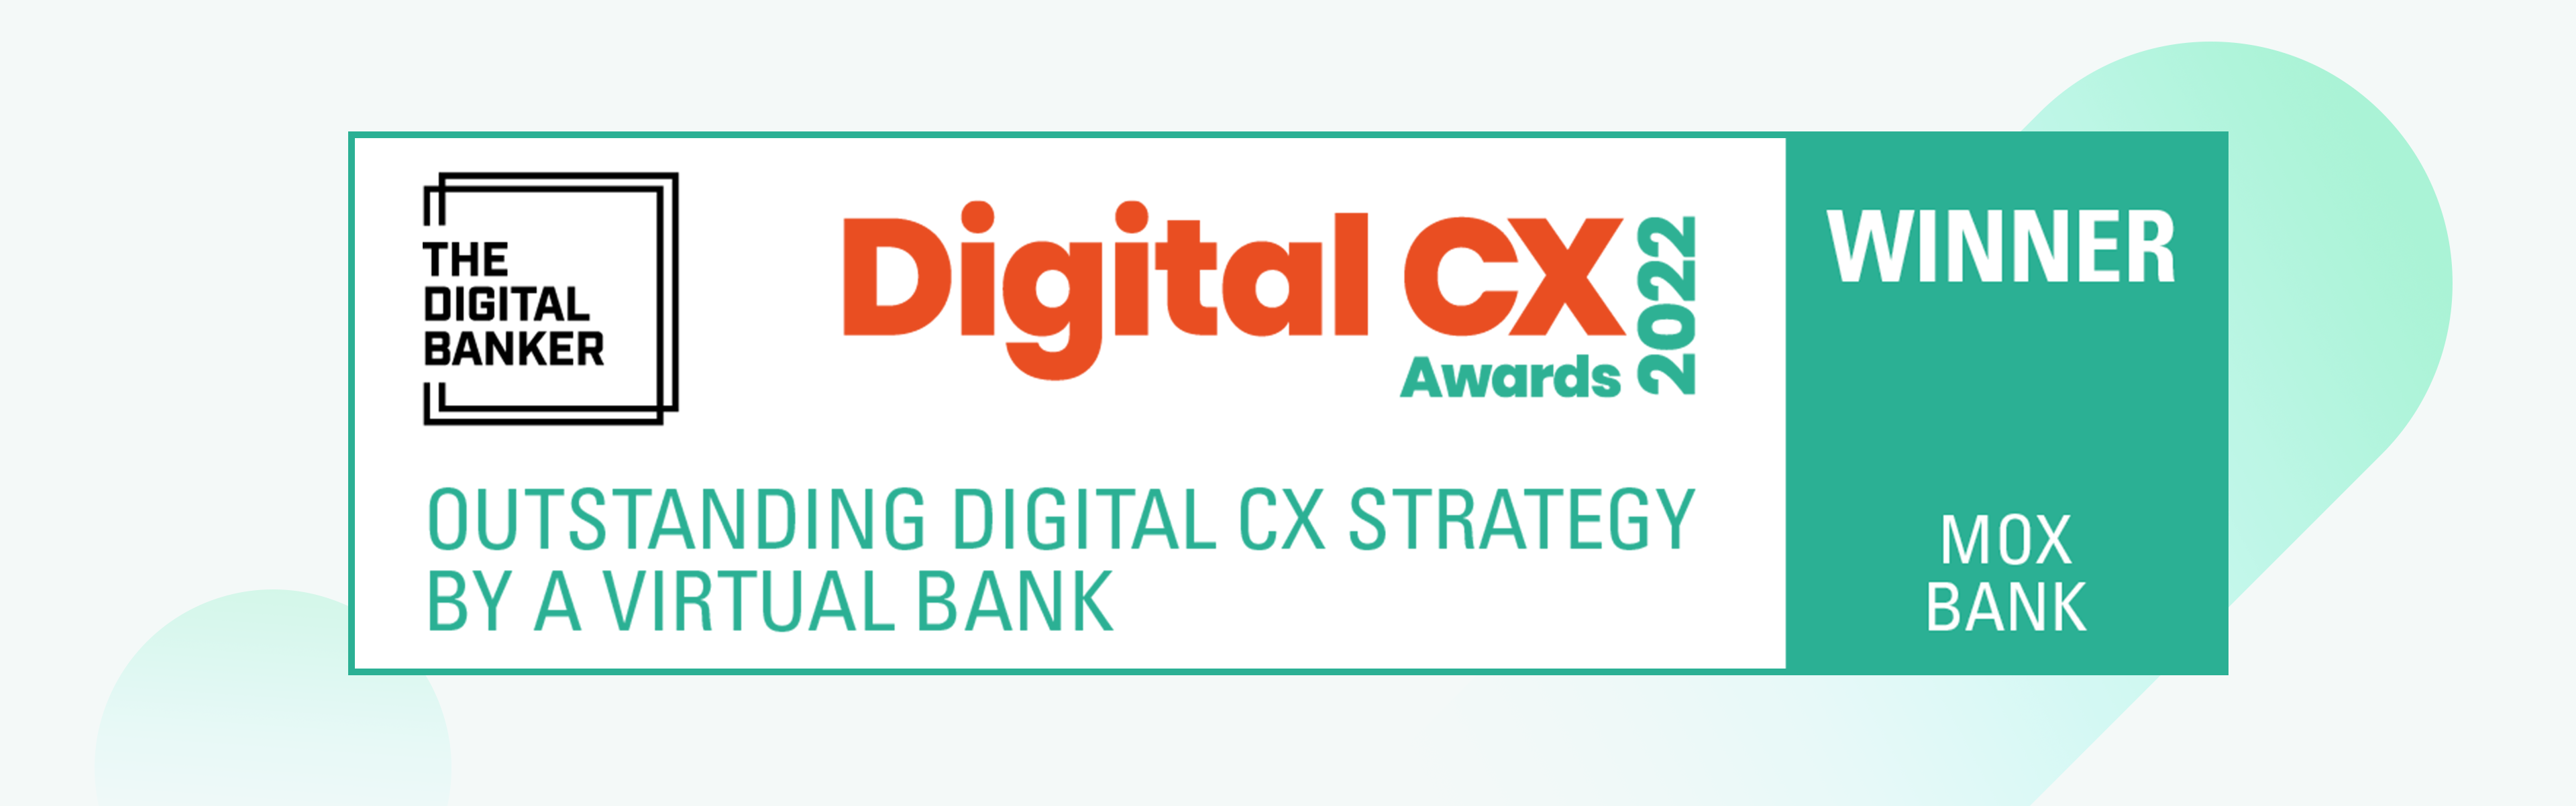 Mox Wins “Outstanding Digital CX Strategy by a Virtual Bank” at Digital CX Awards 2022